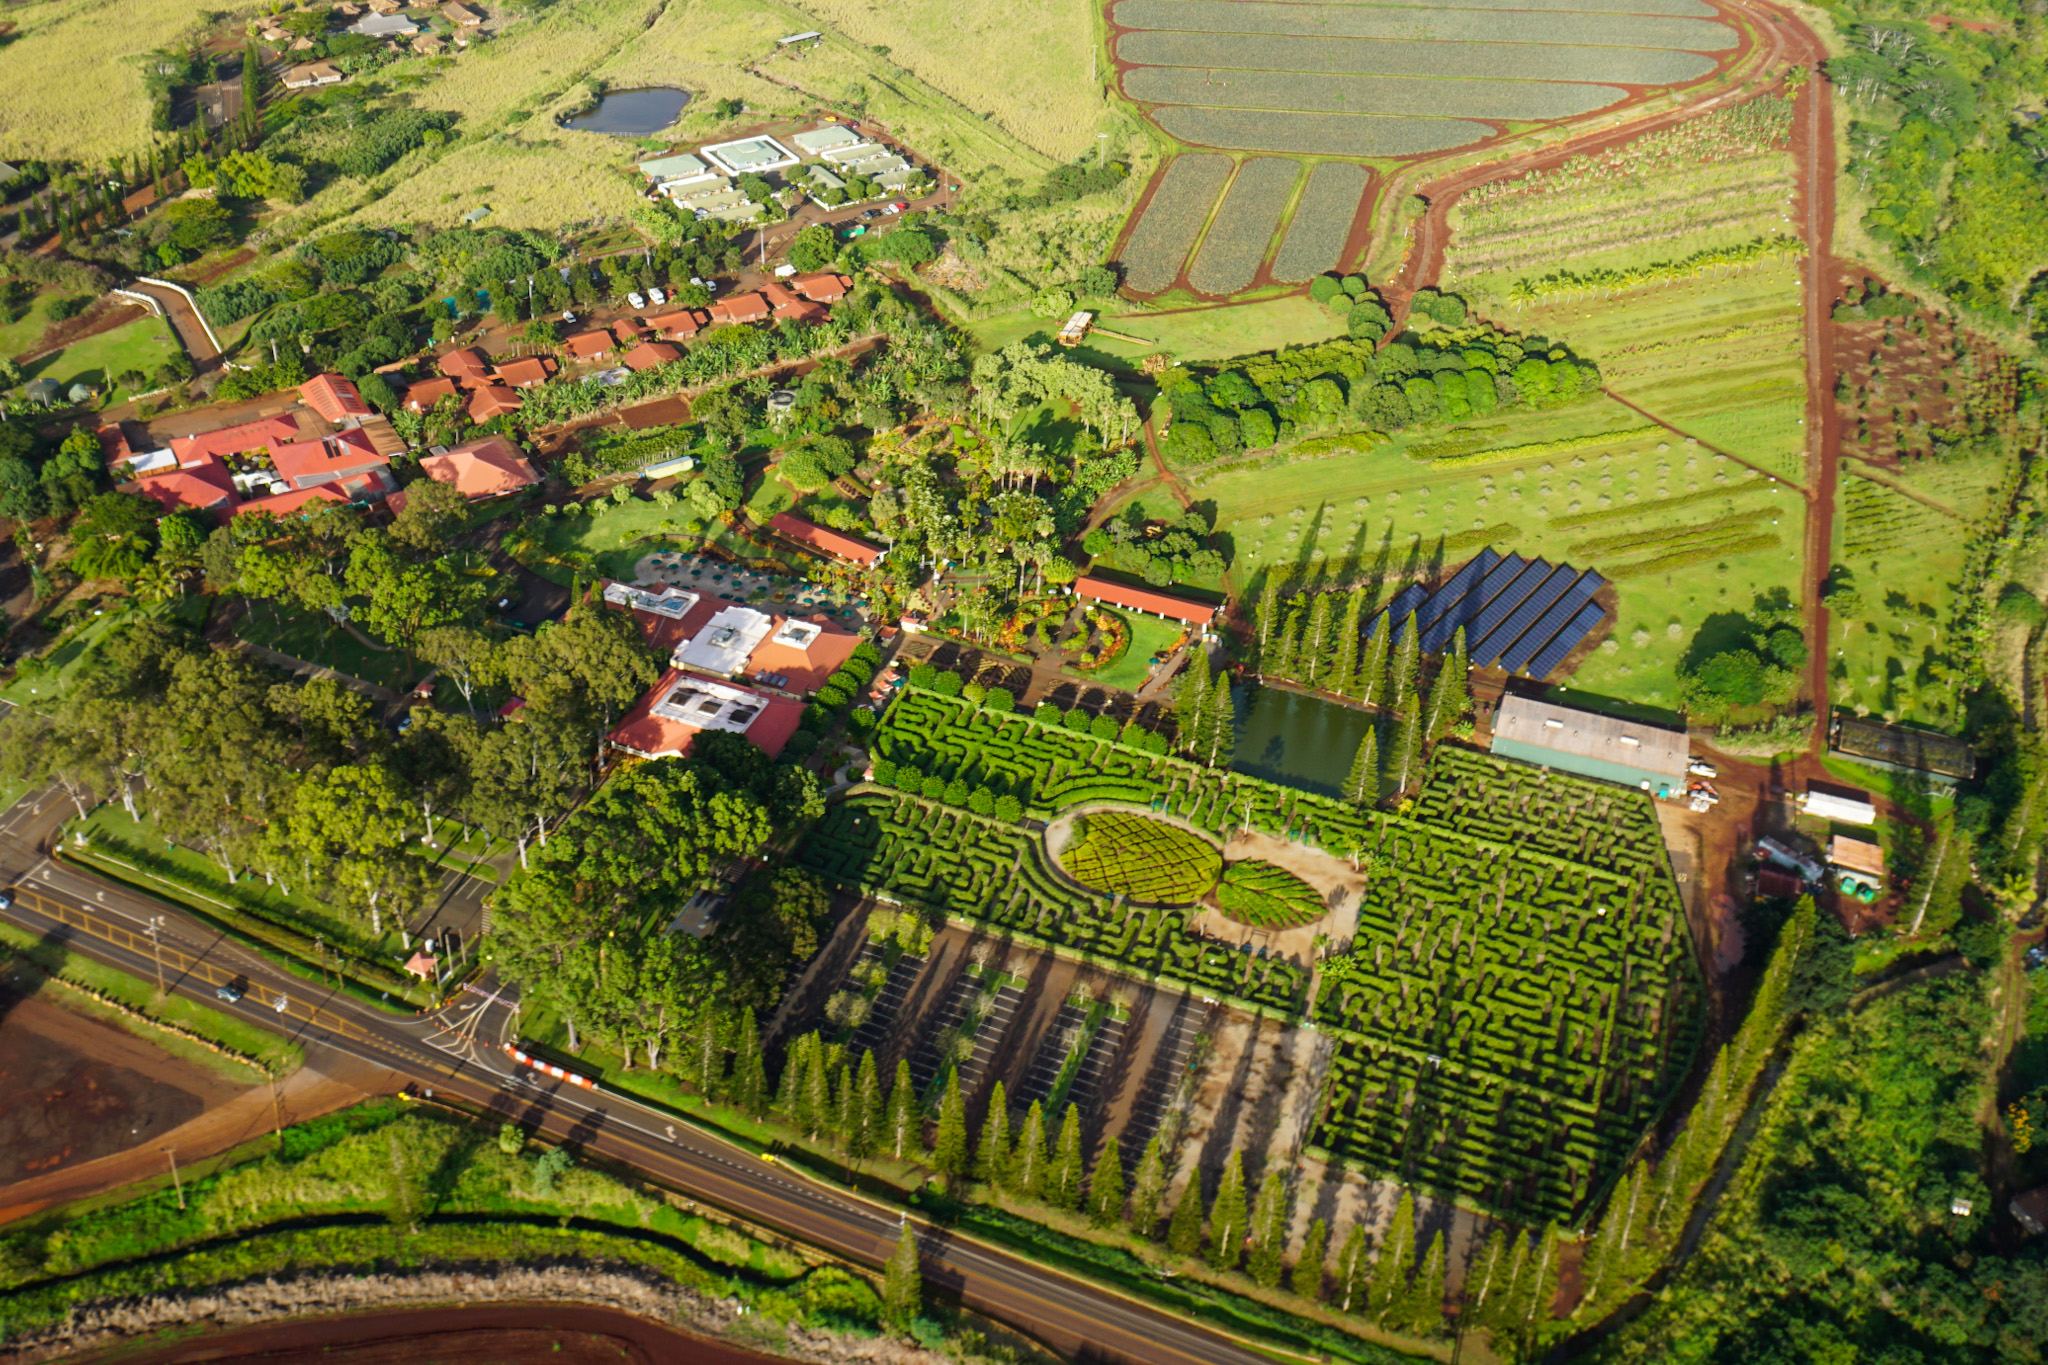 World's Largest Maze at Dole Pineapple Plantation on Oahu's North Shore